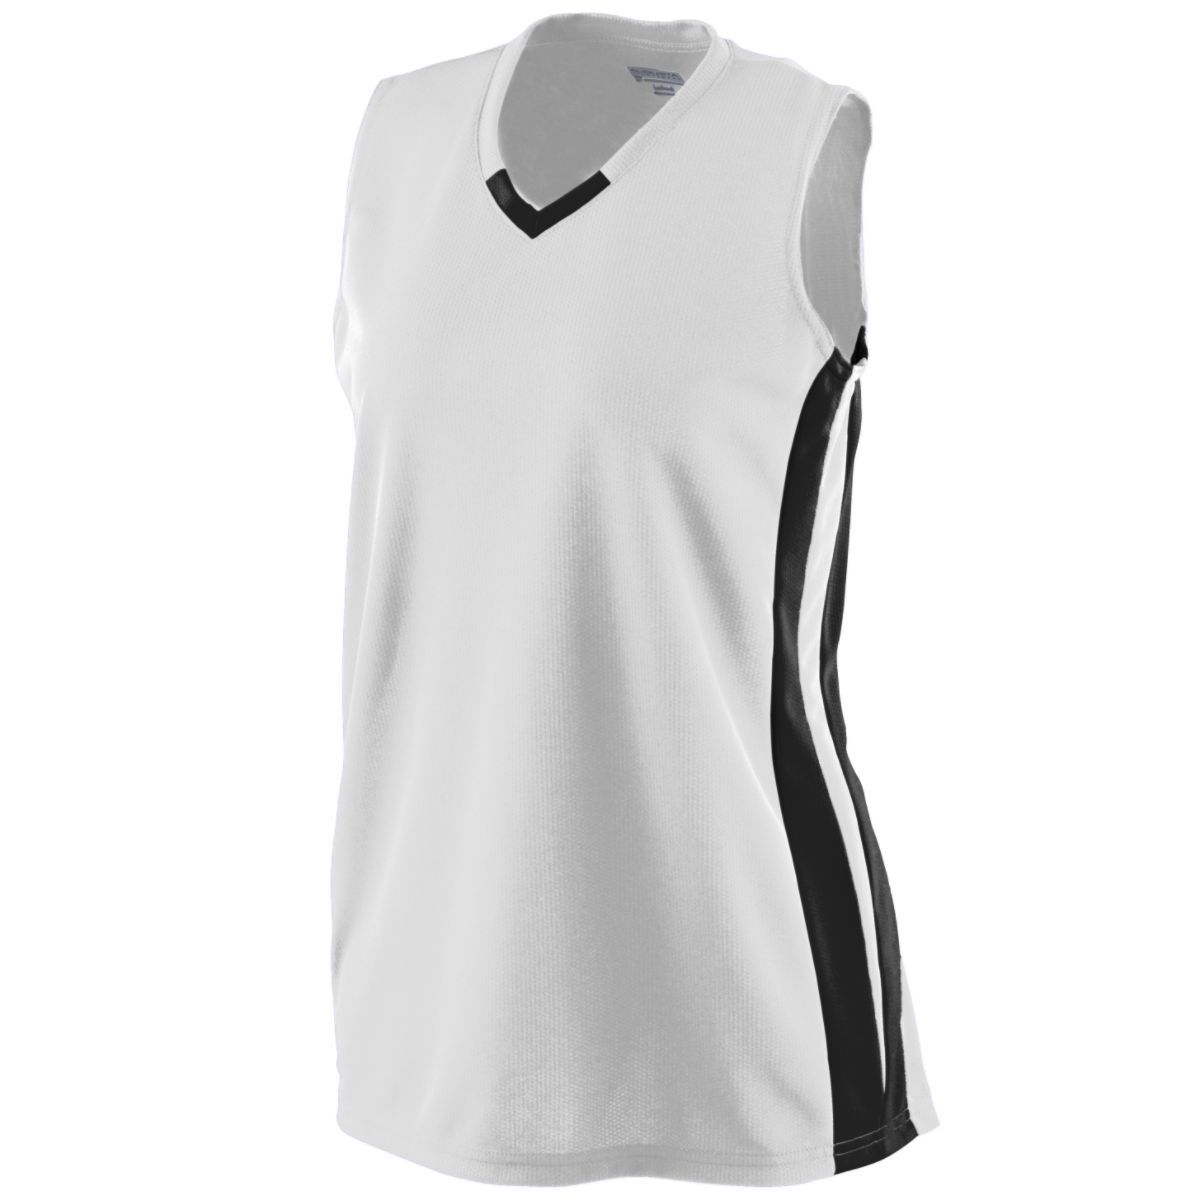 Augusta Sportswear Girls Wicking Mesh Powerhouse Jersey in White/Black  -Part of the Girls, Augusta-Products, Softball, Girls-Jersey, Shirts product lines at KanaleyCreations.com